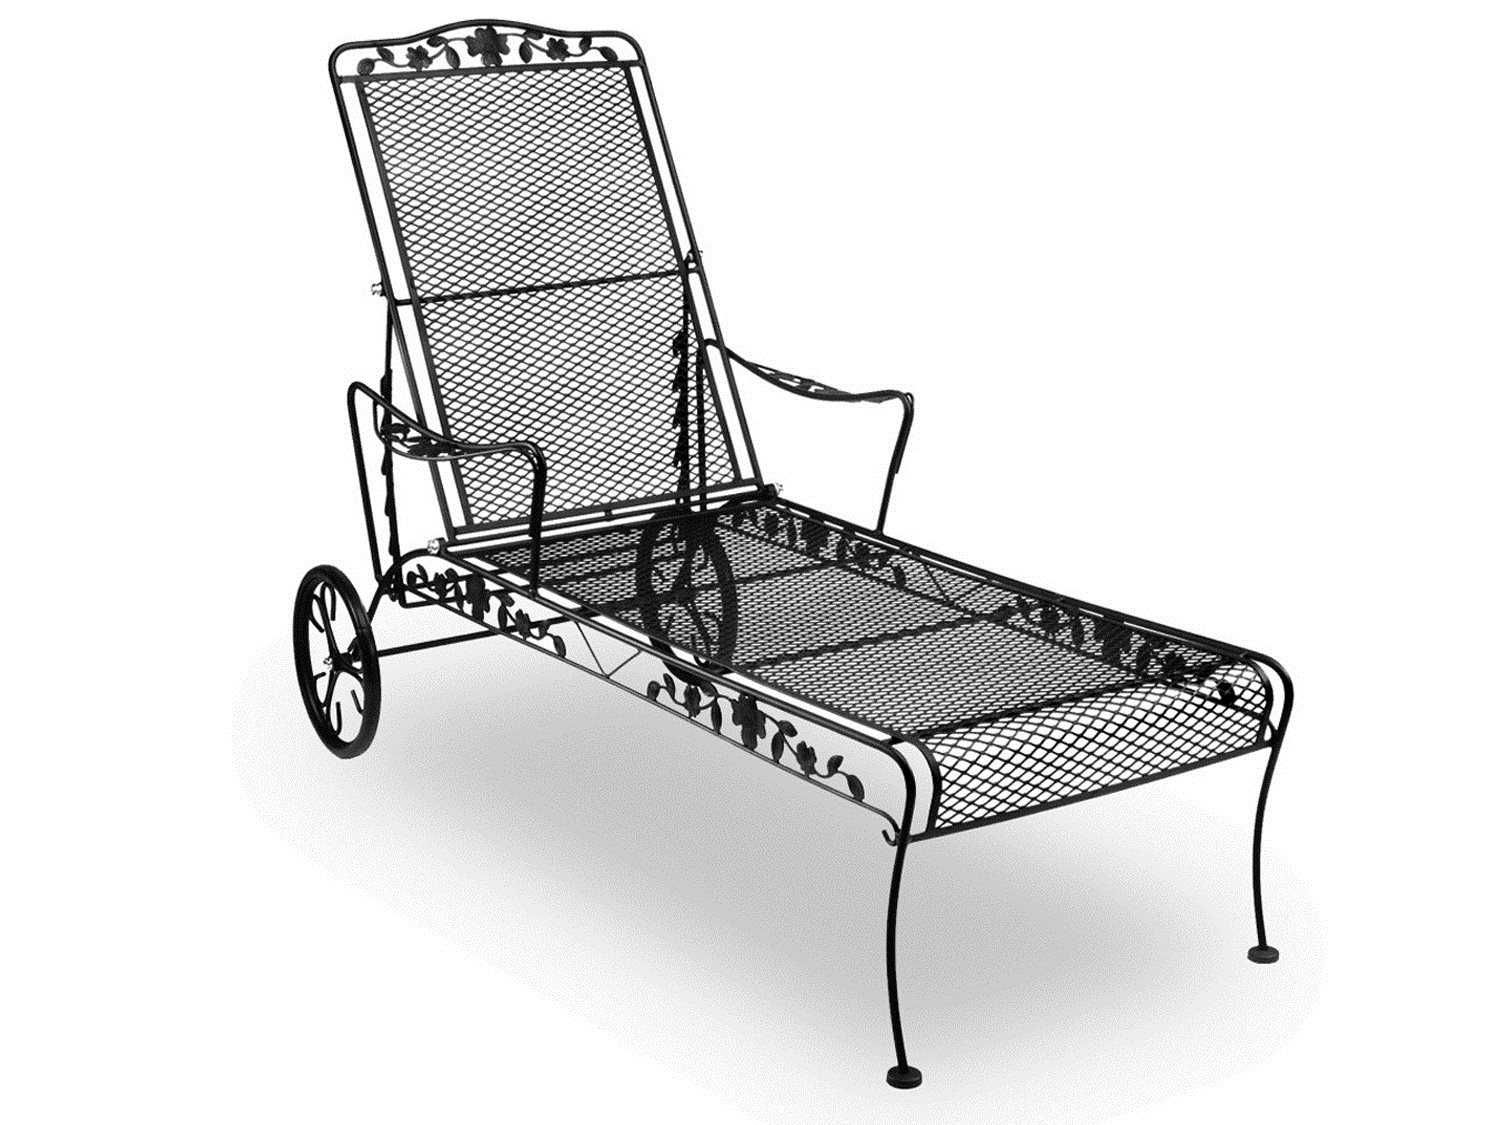 Meadowcraft Dogwood Wrought Iron Chaise Lounge | Md761540001 With Steel Arm Outdoor Aluminum Chaise Sets (View 10 of 15)